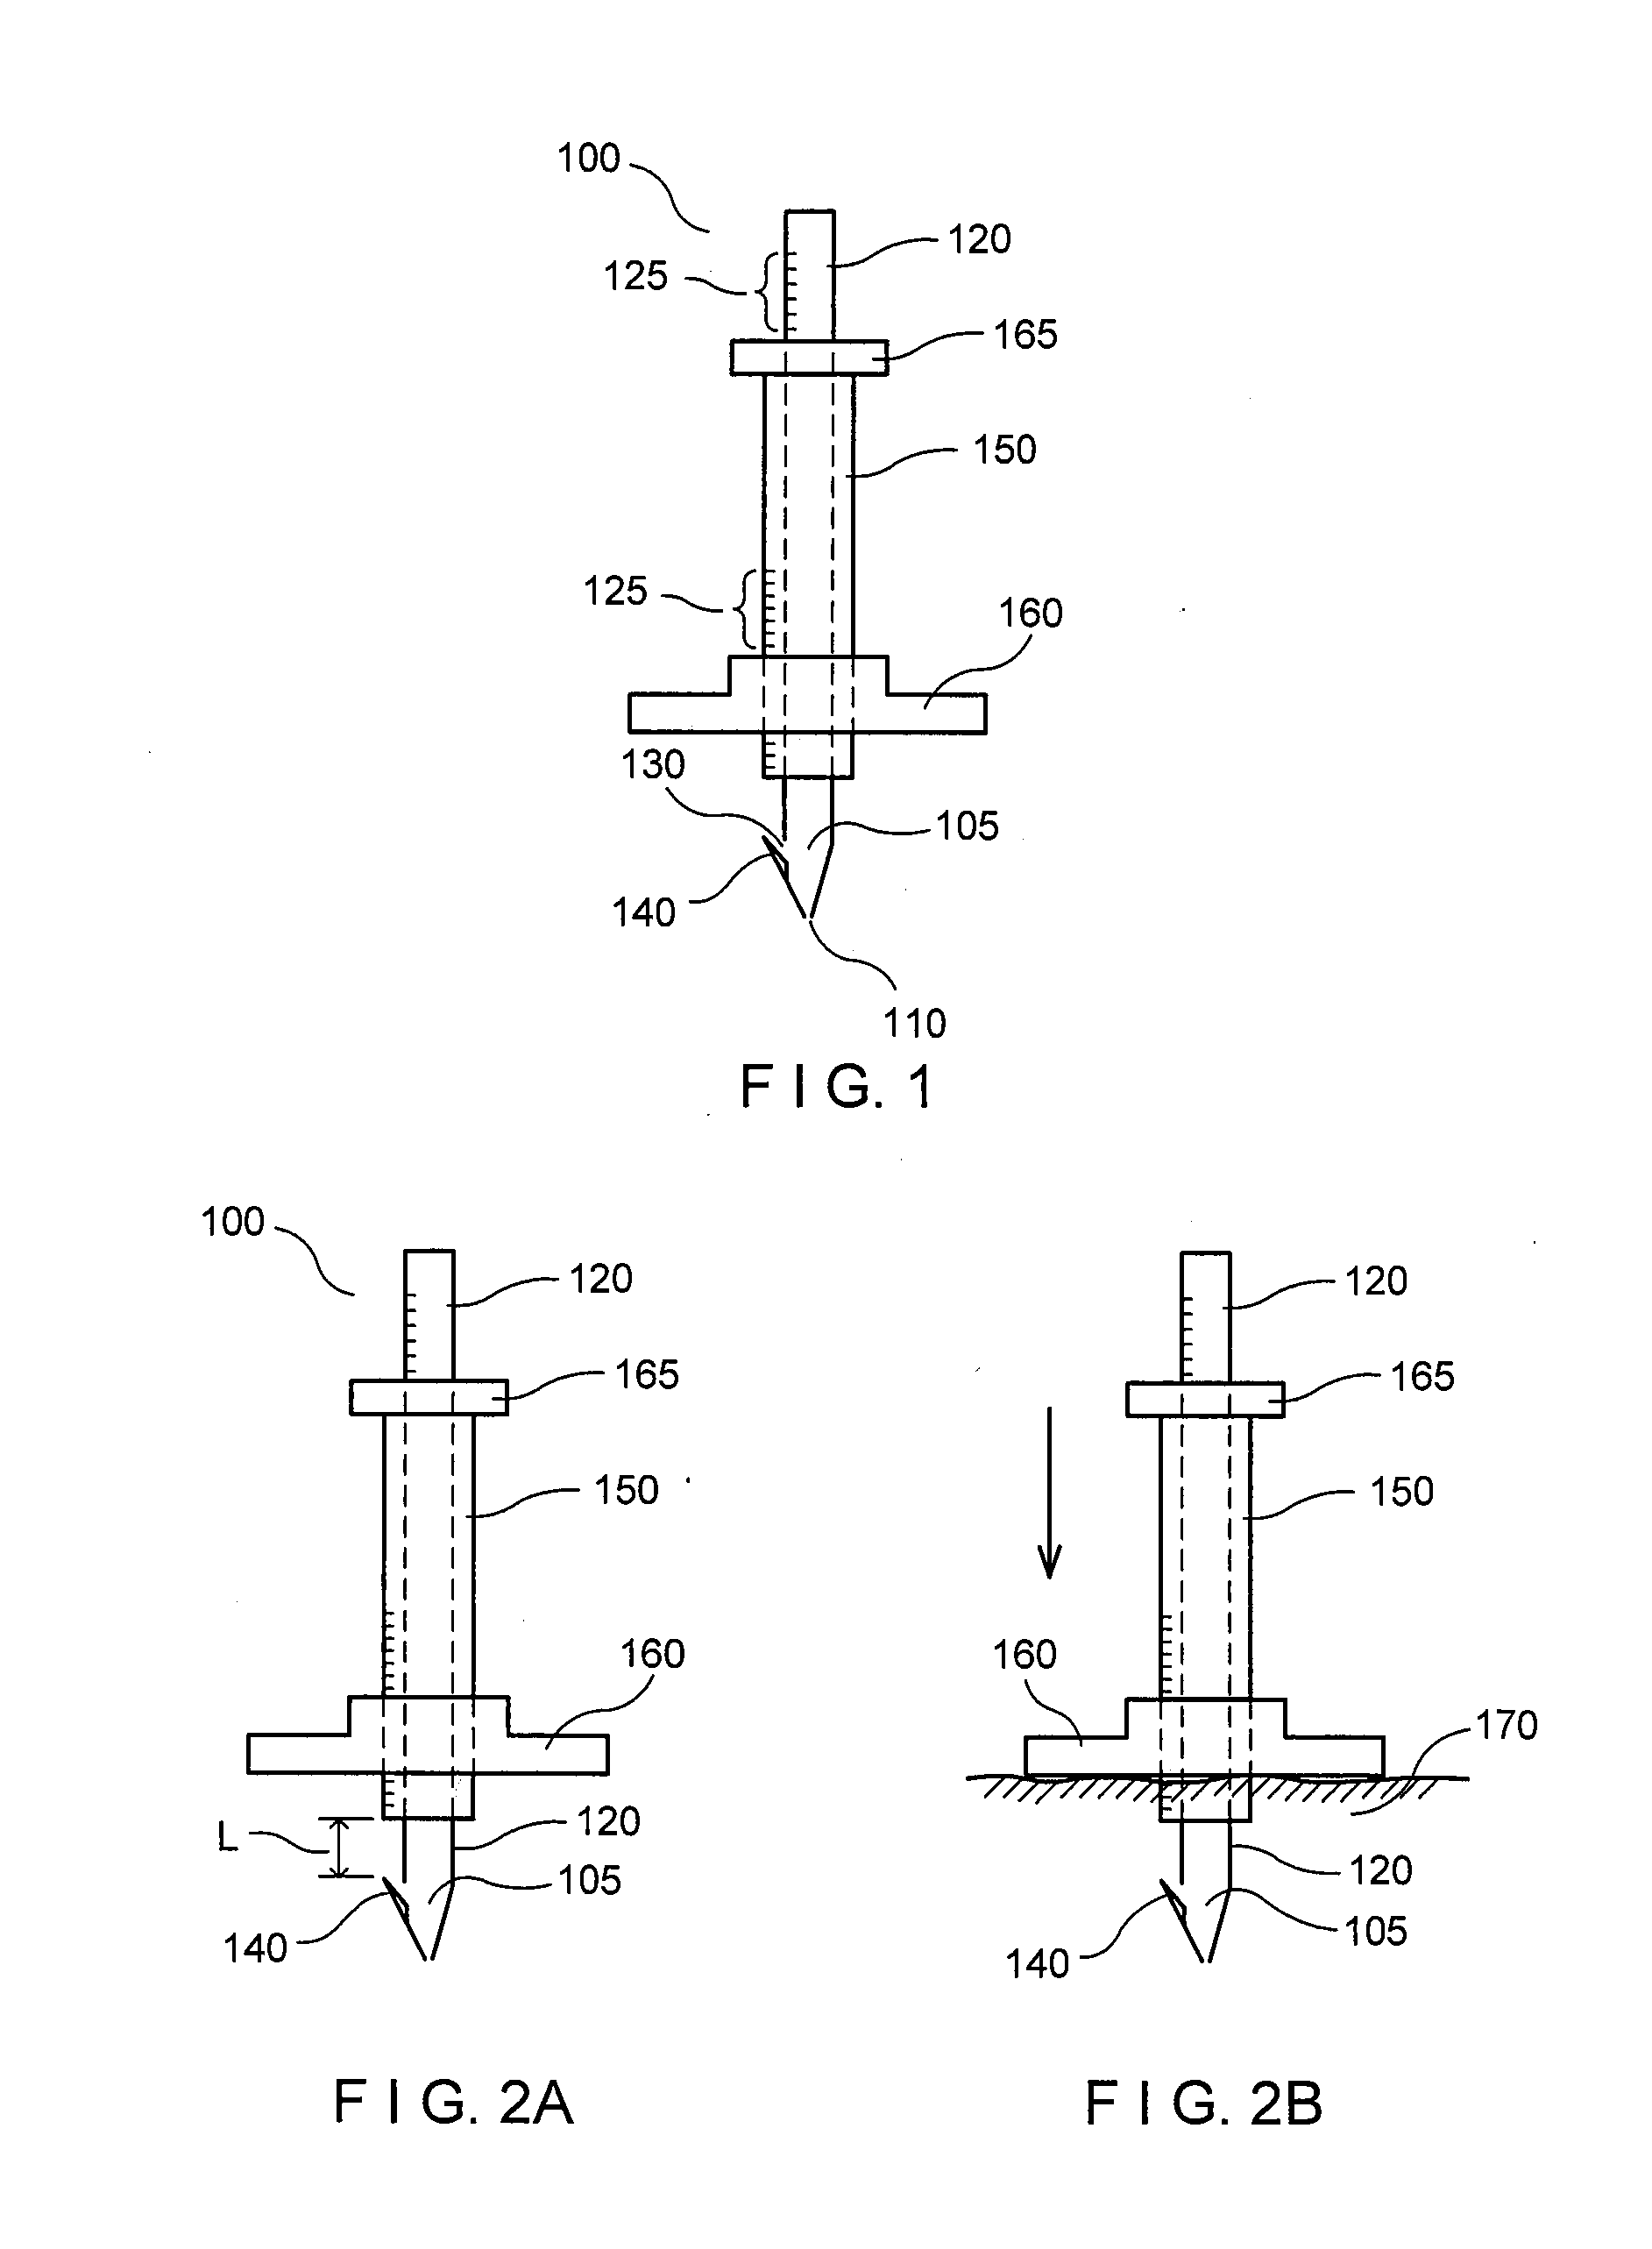 Method and apparatus for subsurface tissue sampling